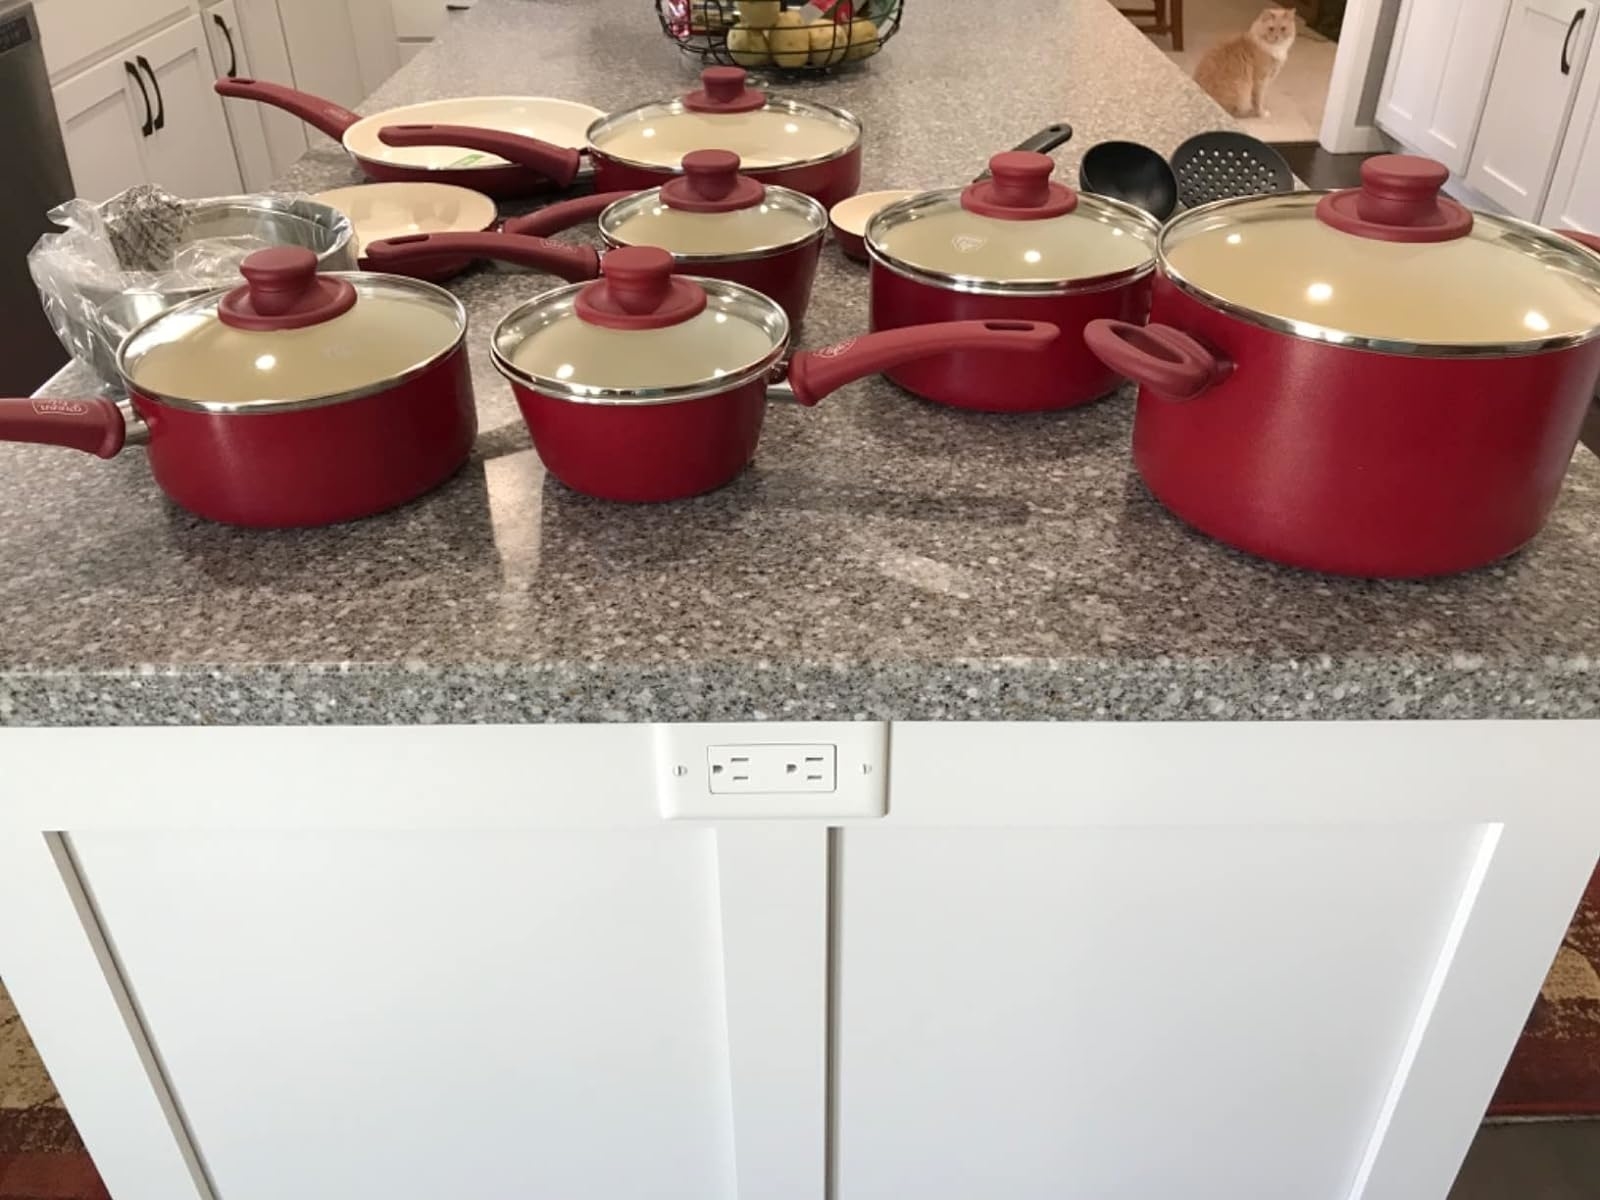 Reviewer image of the red cooking pots on their kitchen countertop